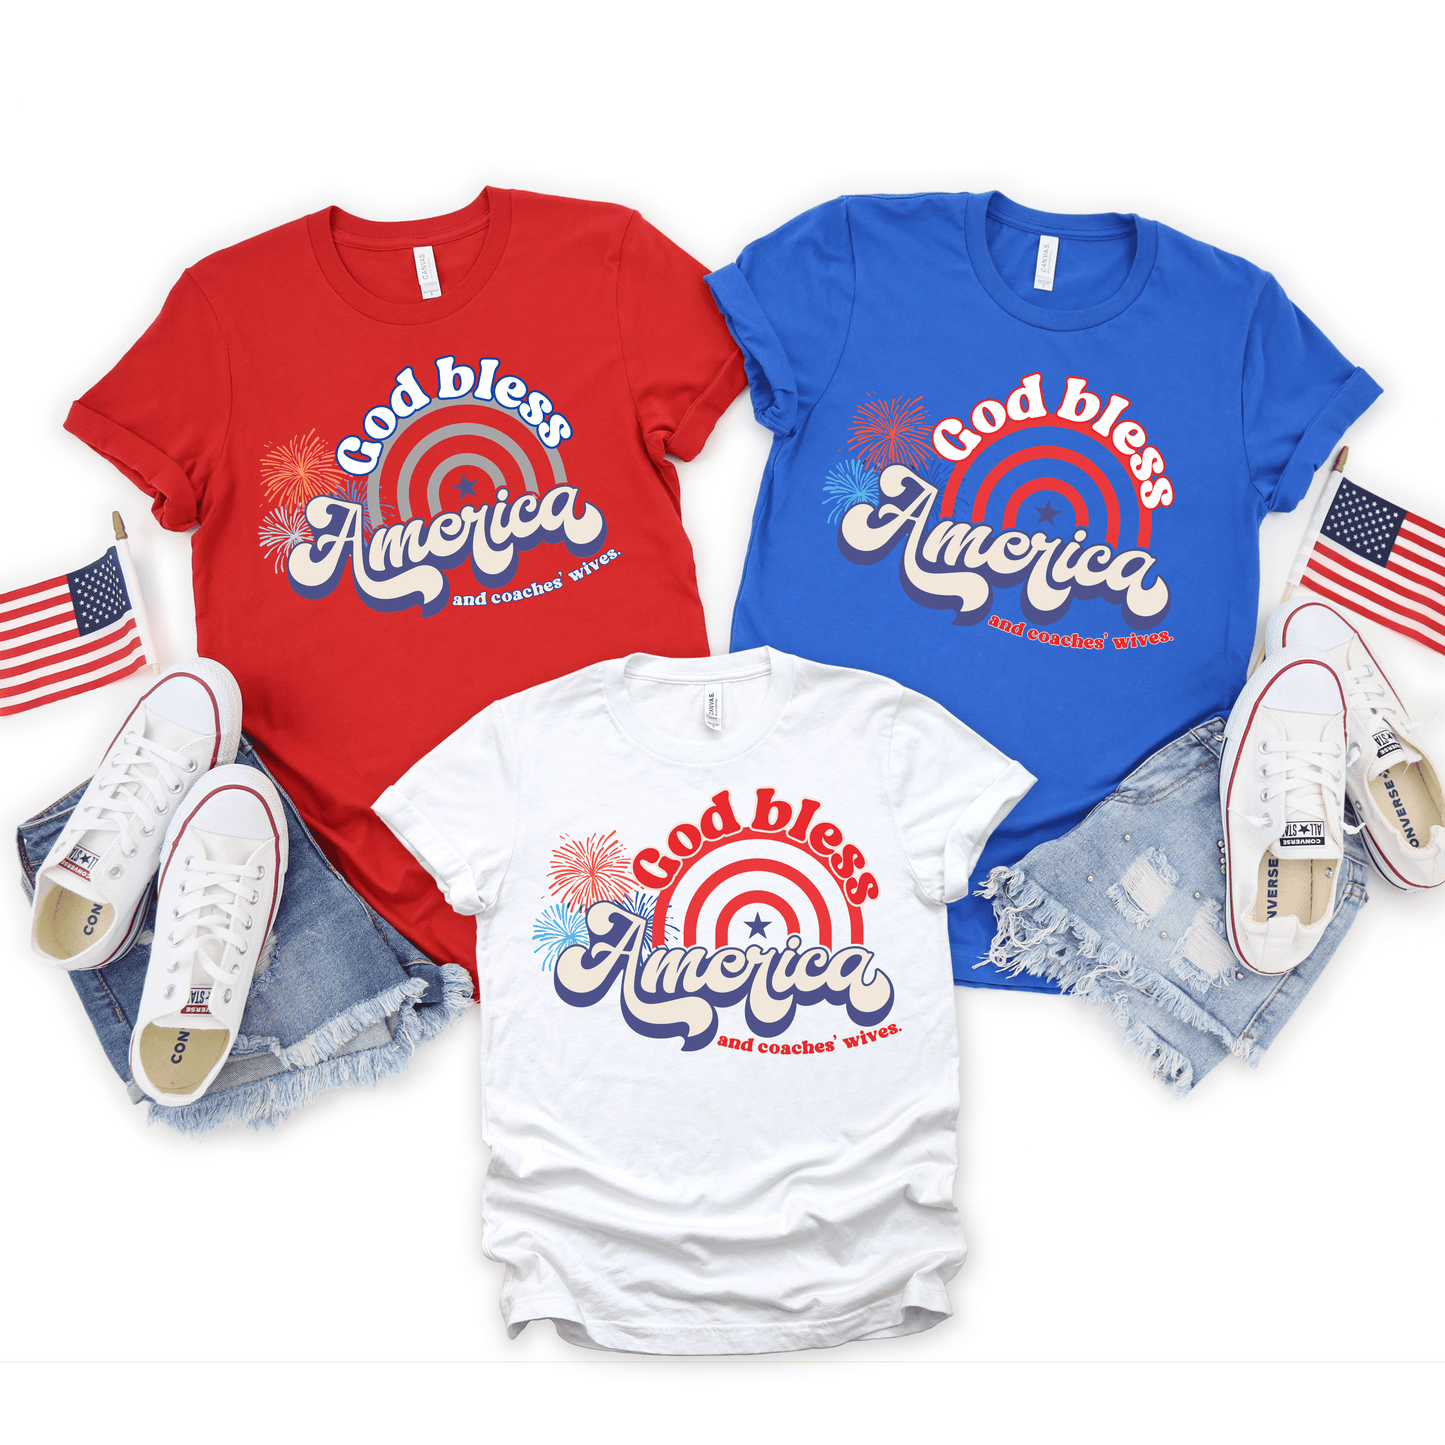 God Bless America and Coaches' Wives Tee